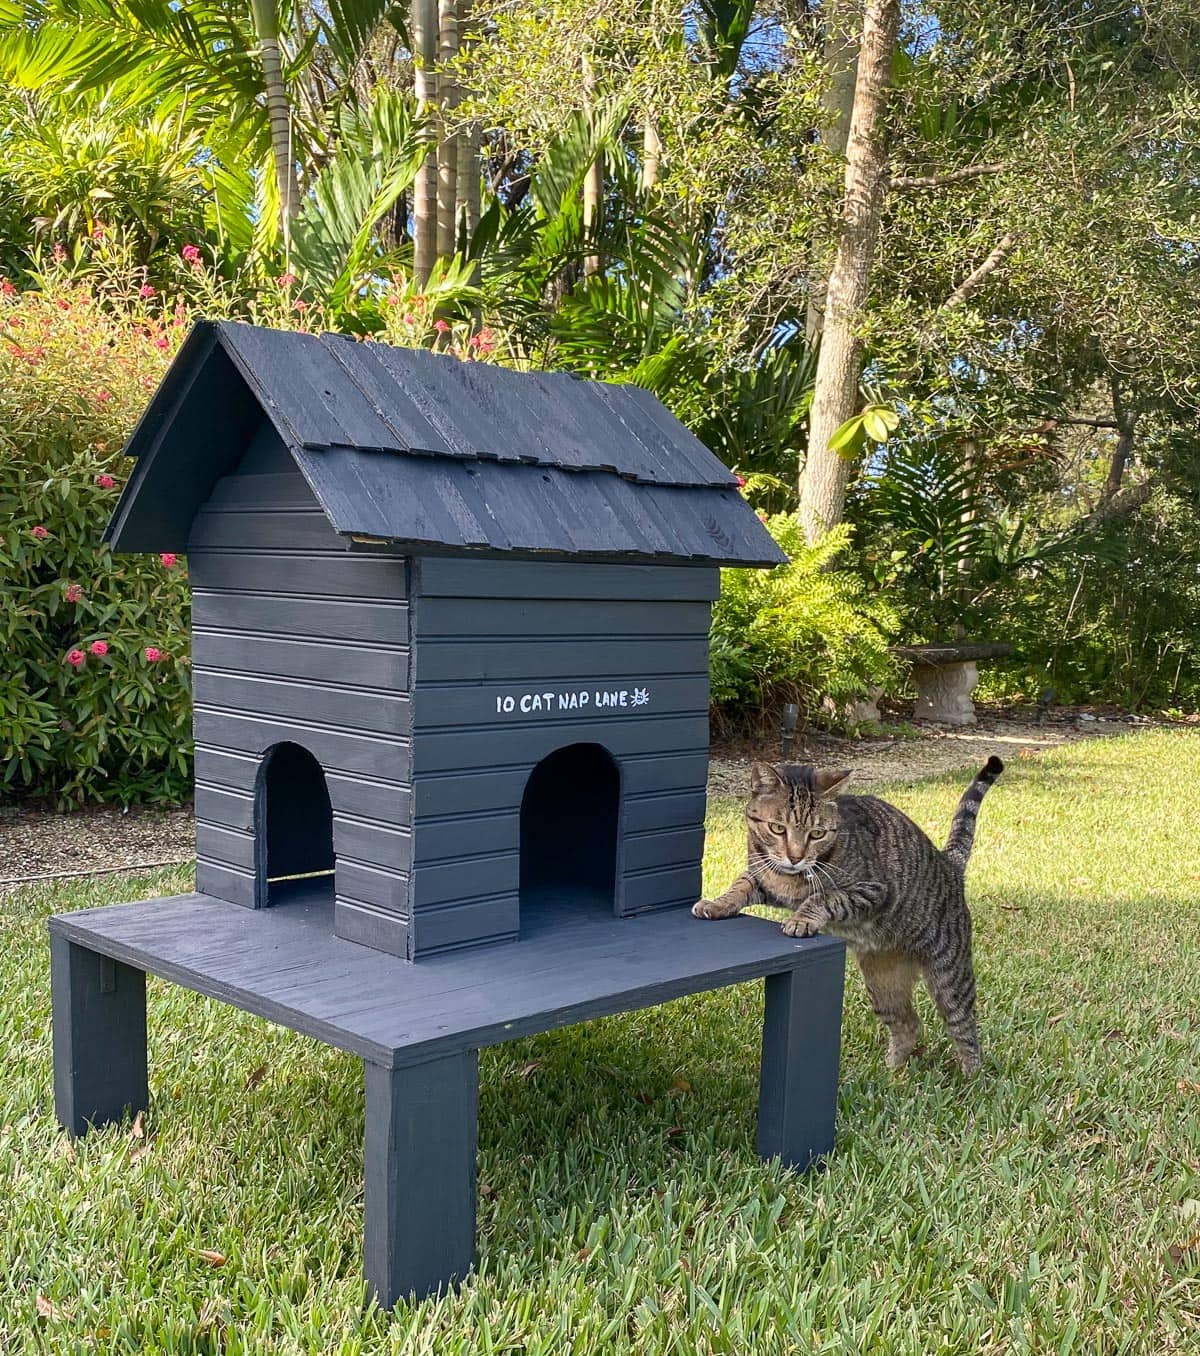 How to Build a Kitty Condo to Keep Stray Cats Warm This Winter